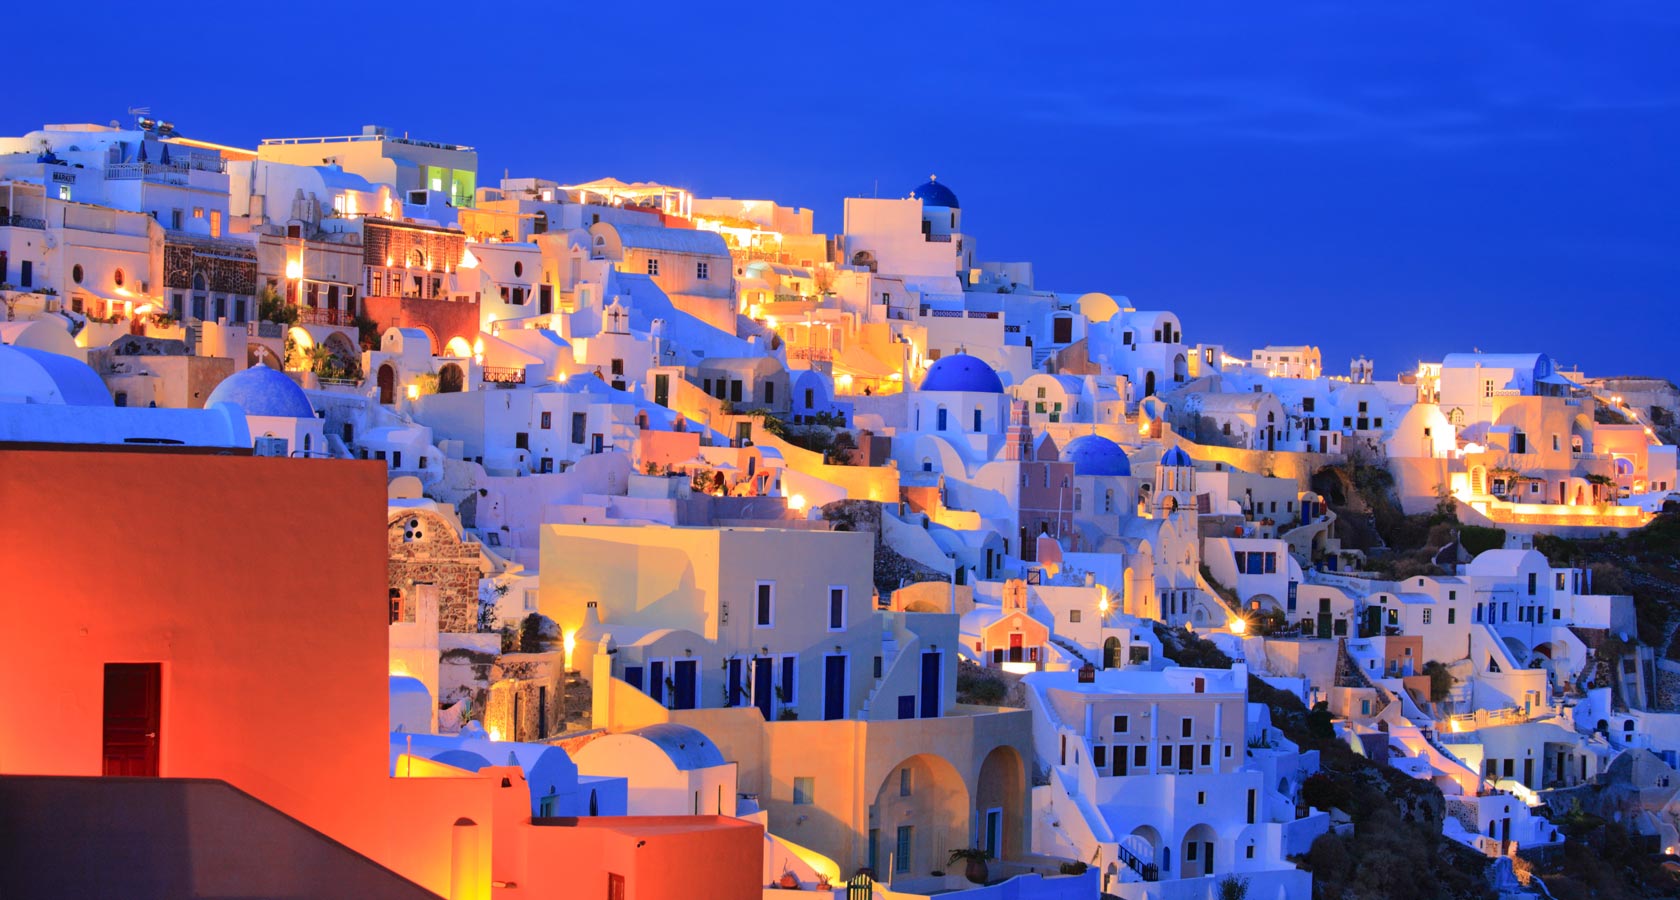 Enjoy the magnificent beauty of Oia in Santorini